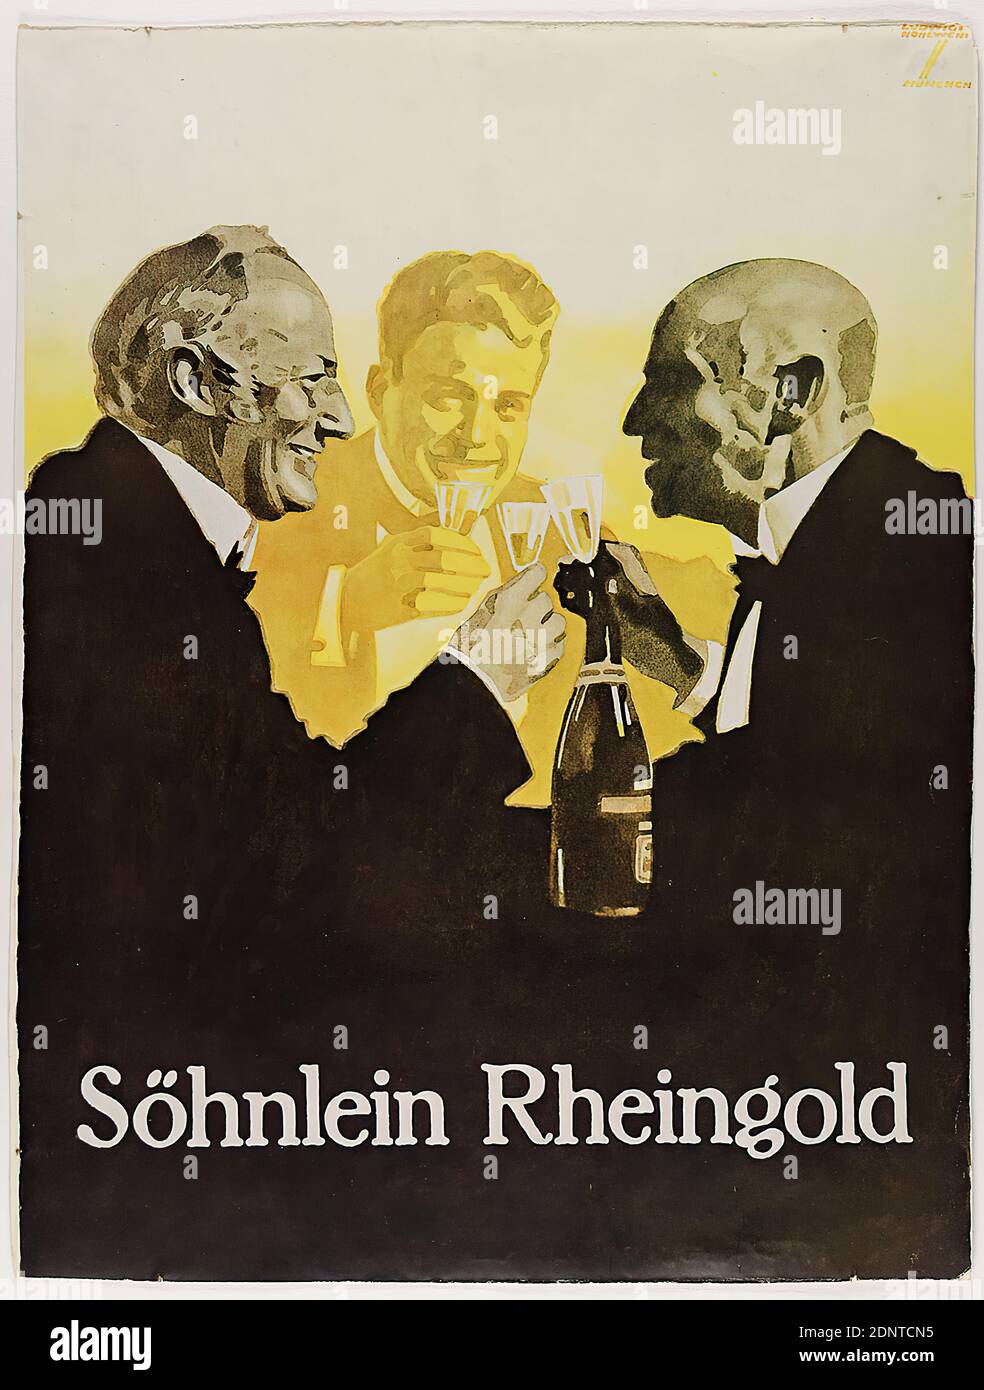 Ludwig Hohlwein, Söhnlein Rheingold, paper, offset printing, total: height: 35,2 cm; width: 26,7 cm, signed: recto u. li. in print: LUDWIG HOHLWEIN, MÜNCHEN, product advertising (posters), alcoholic beverages Stock Photo